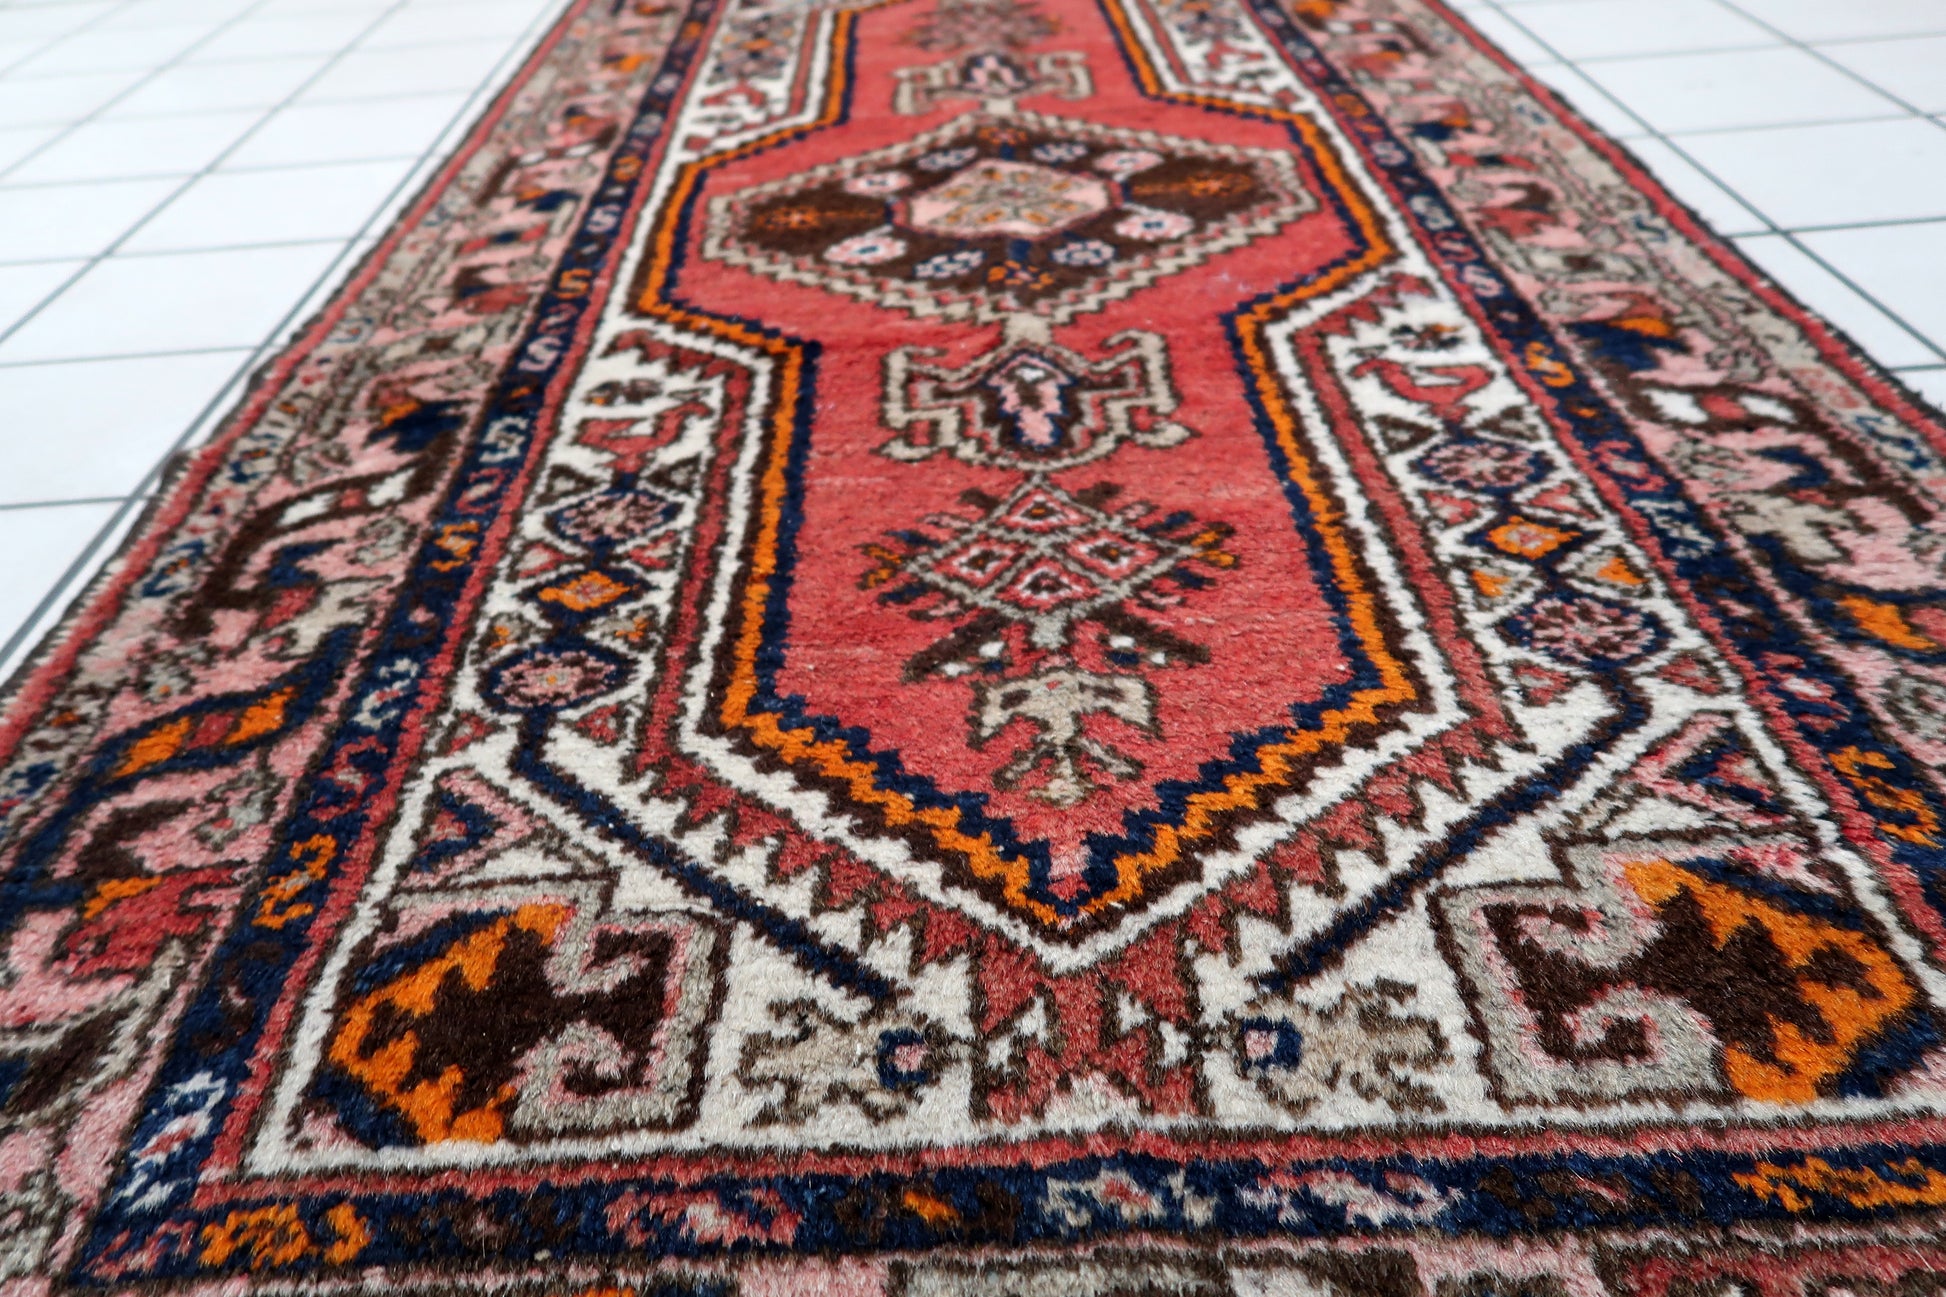 Detailed picture capturing the overall design and beauty of the handmade vintage Persian Hamadan rug